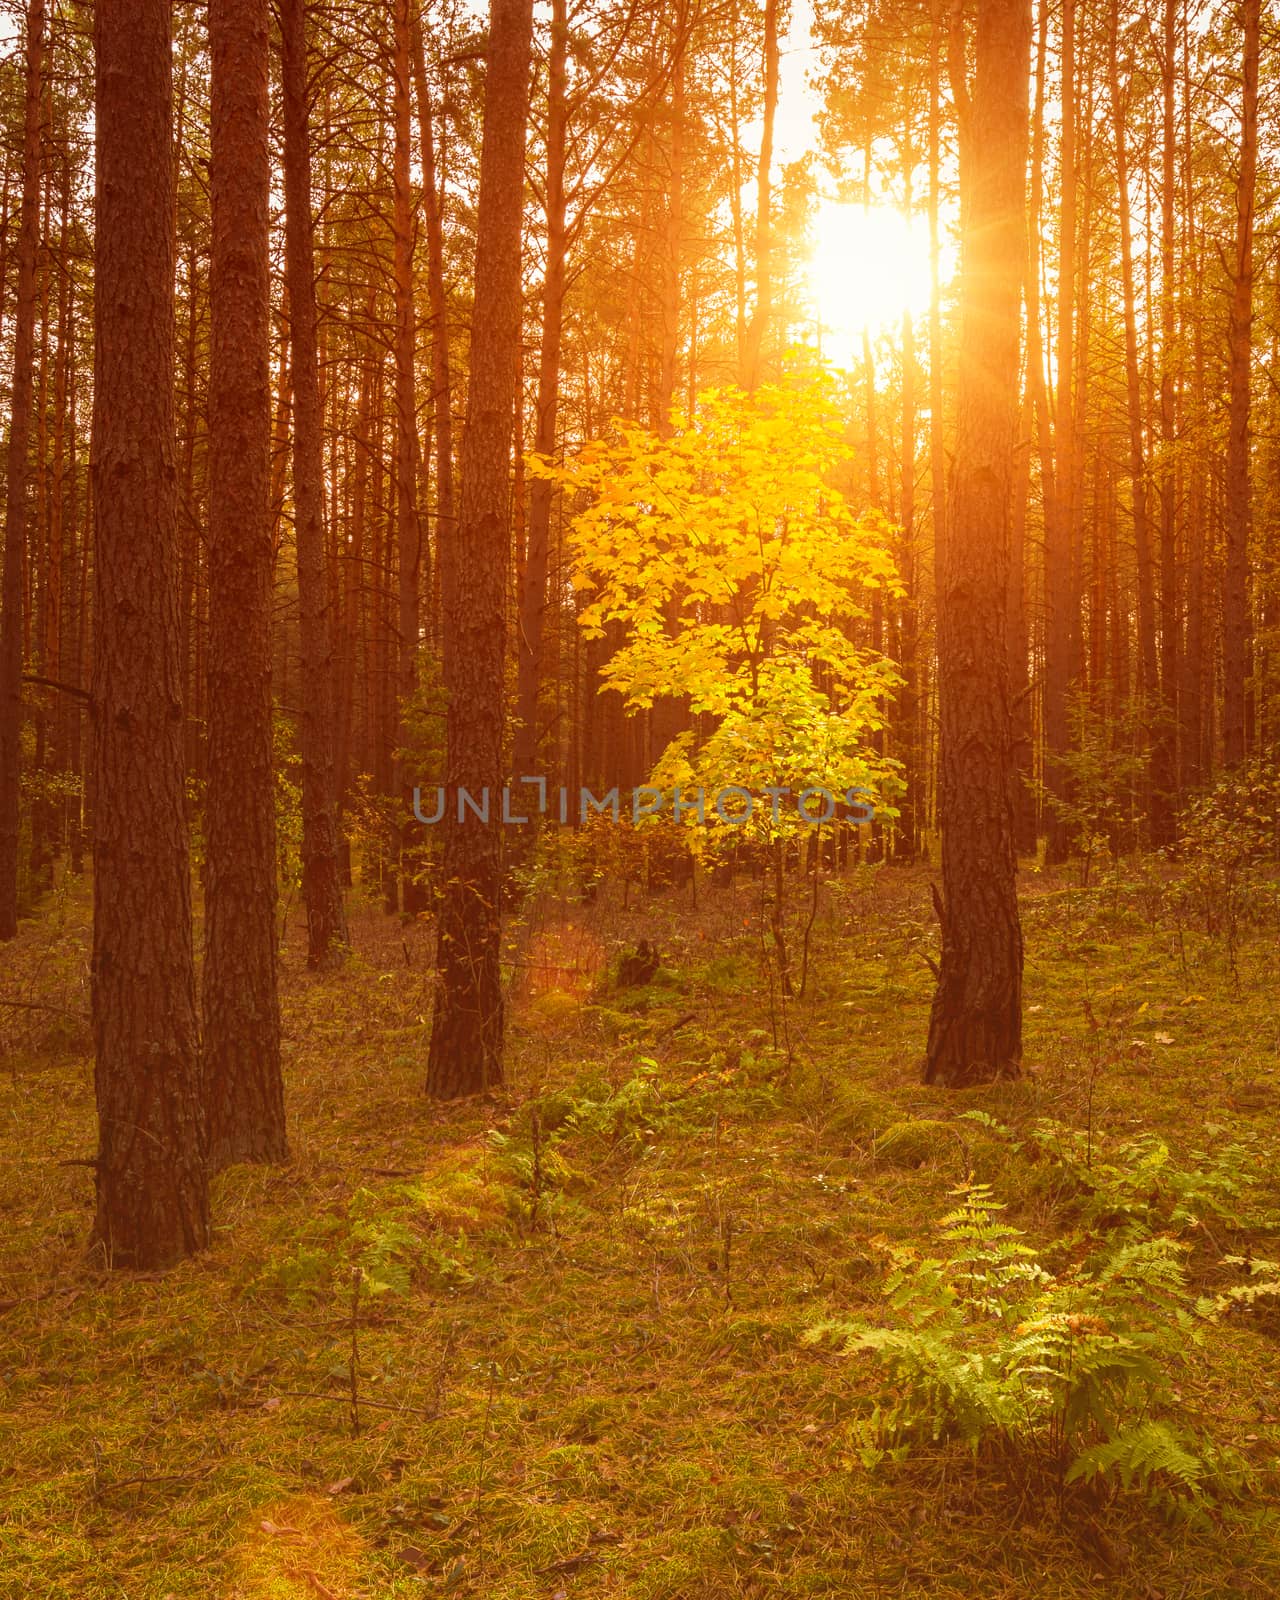 Maple with golden leaves in the autumn pine forest at sunset or sunrise. Sunbeams shining between tree trunks.